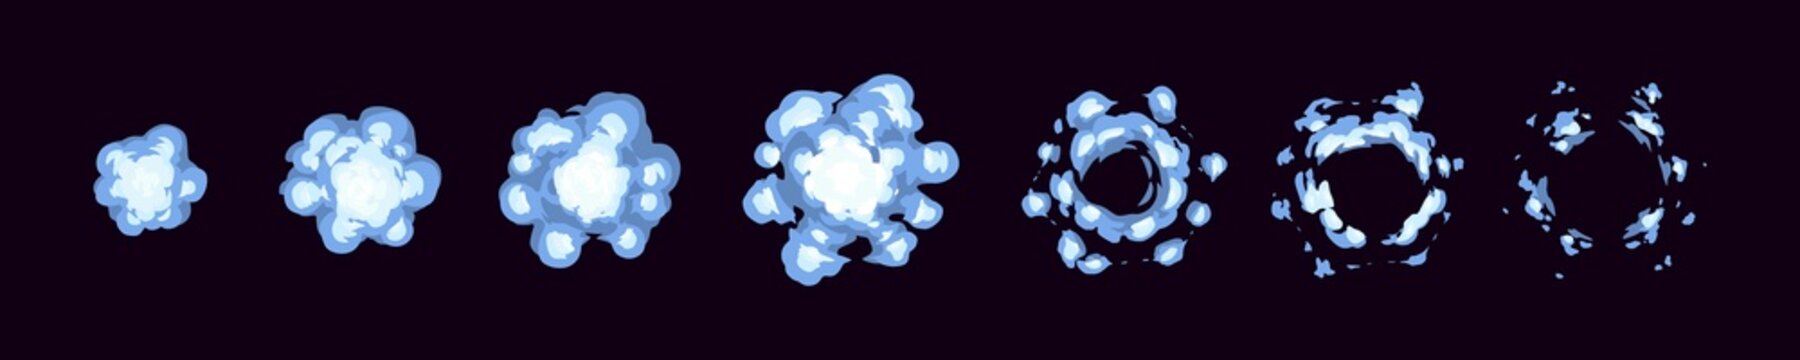 Smoke explode animation sprite sheet. Cartoon clouds, steam vfx explosion animated shot, sequence frame. Puff effect movement storyboard motion, flash boom isolated elements, Vector illustration set.